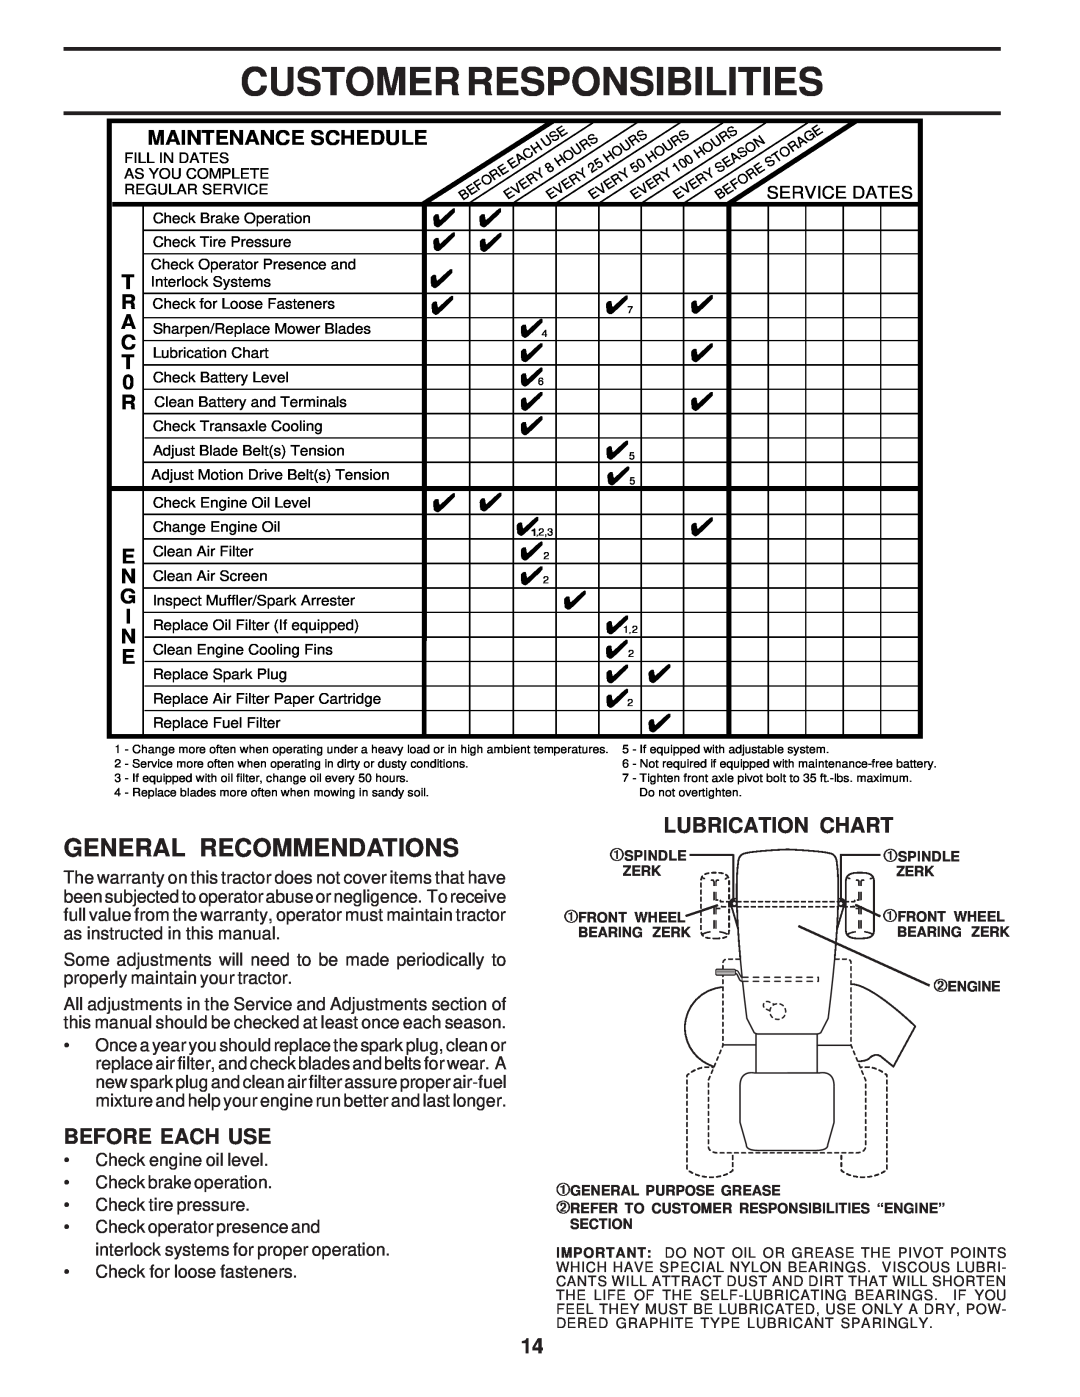 Weed Eater WE12542F, 174193 Customer Responsibilities, General Recommendations, Before Each Use, ¿ Lubrication Chart 